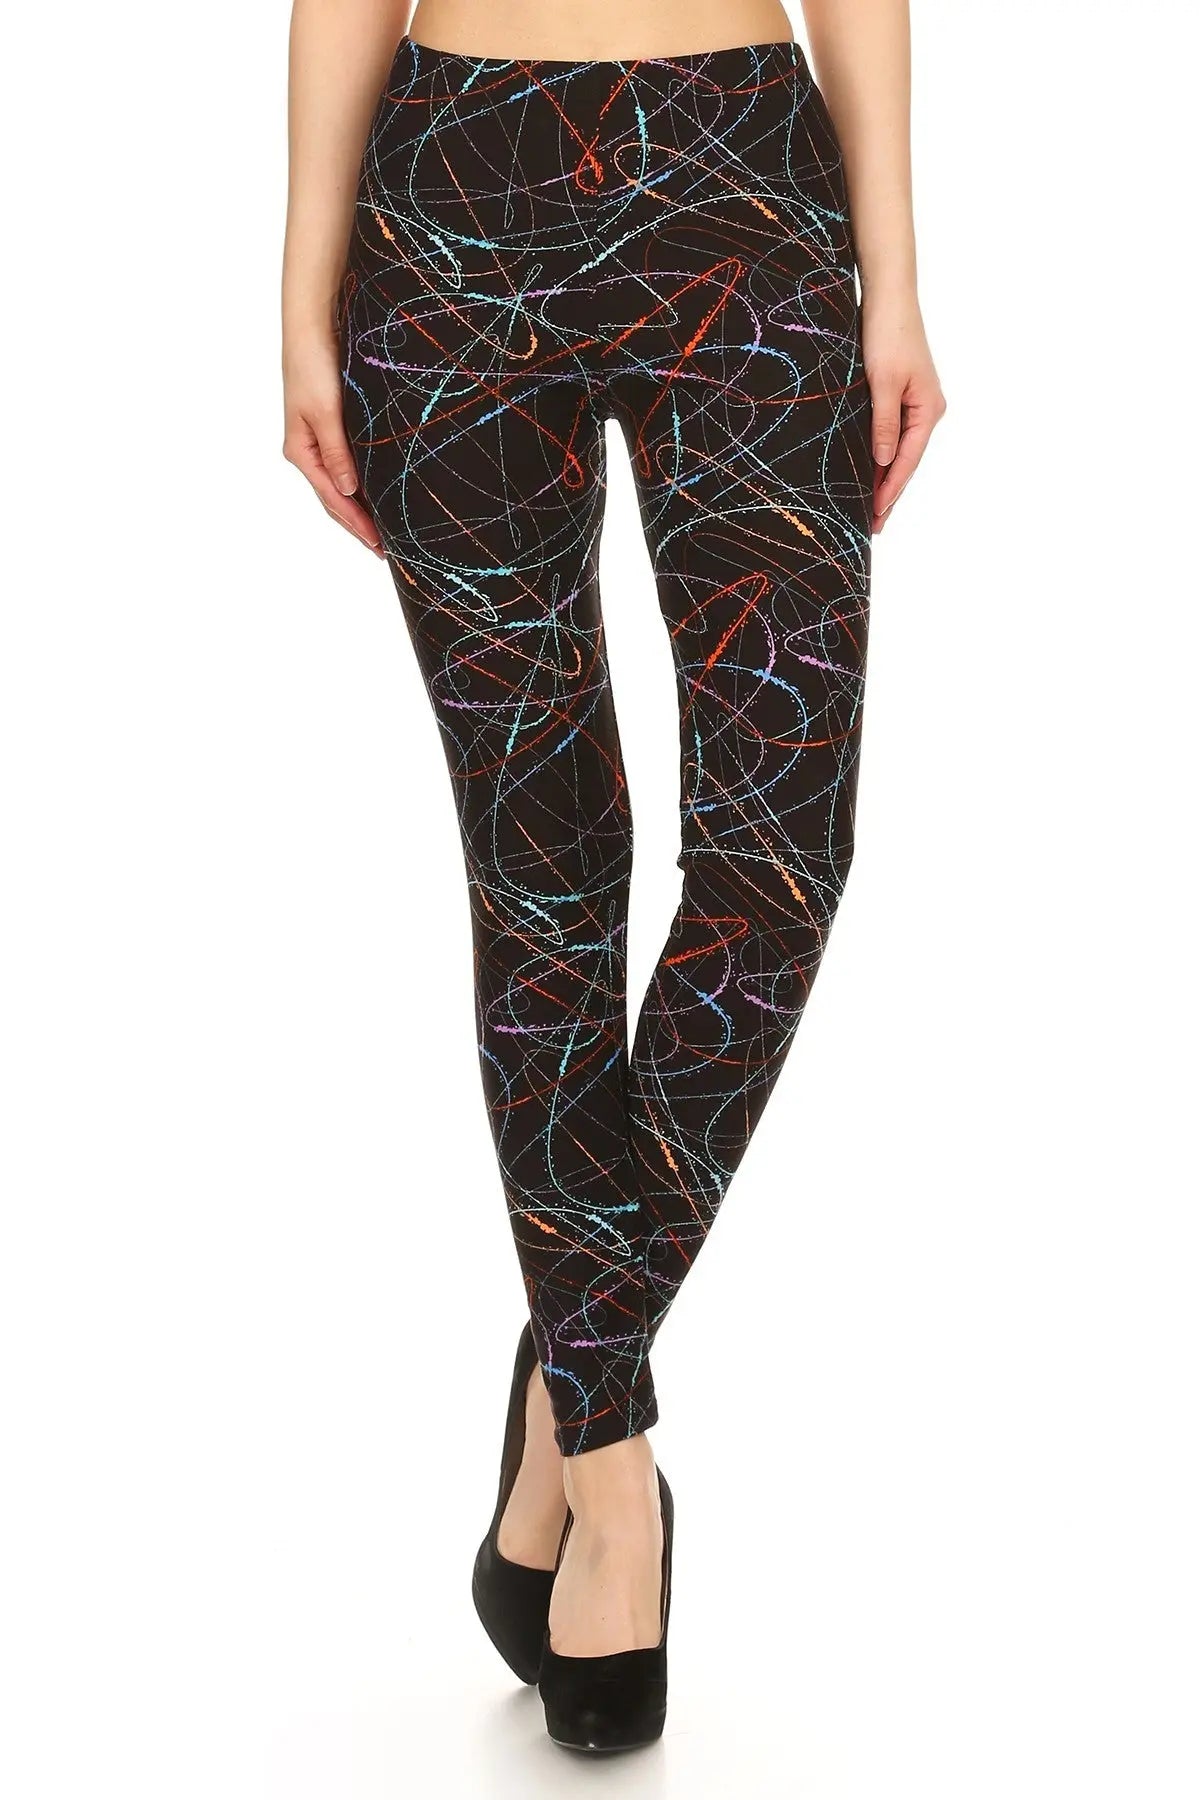 Multicolored Scribble Print, High Waisted Leggings In A Fitted Style With And Elastic Waist Sunny EvE Fashion